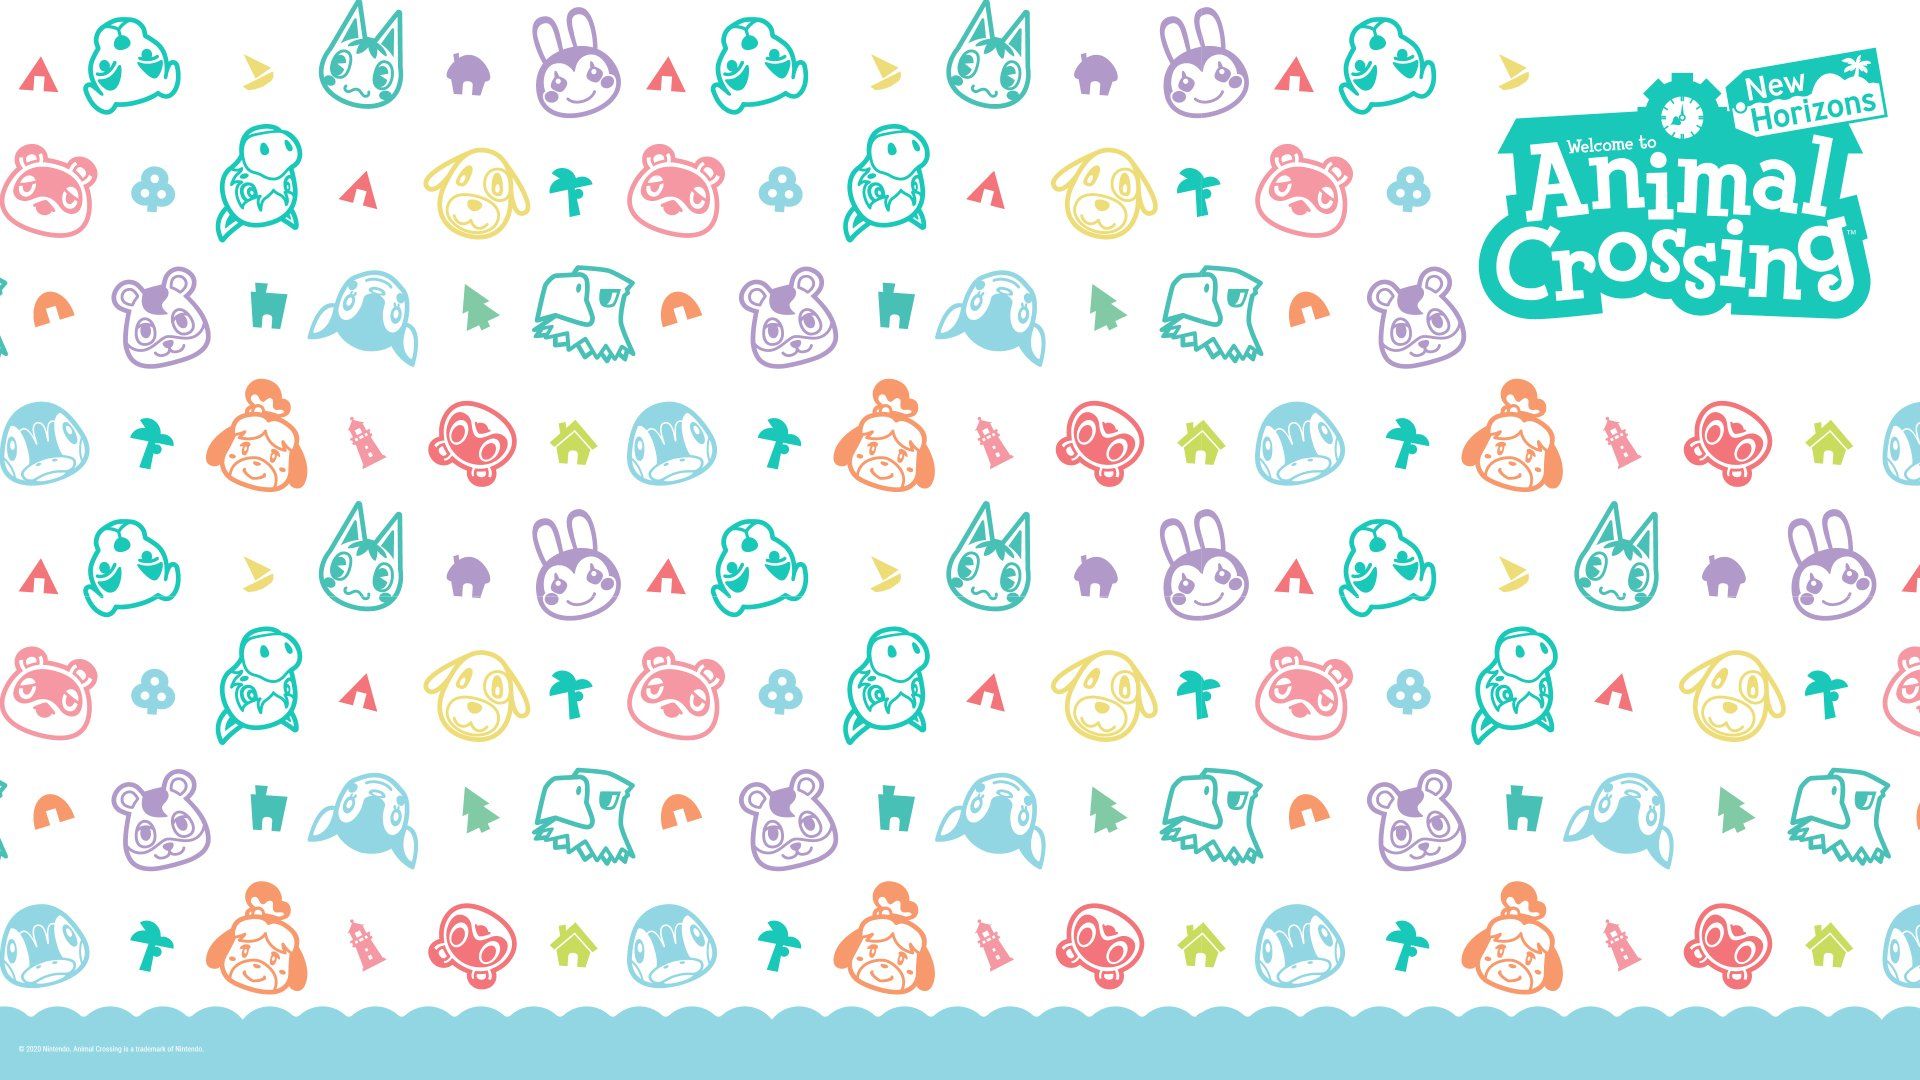 Animal Crossing wallpaper with the game's many colorful characters. - Animal Crossing